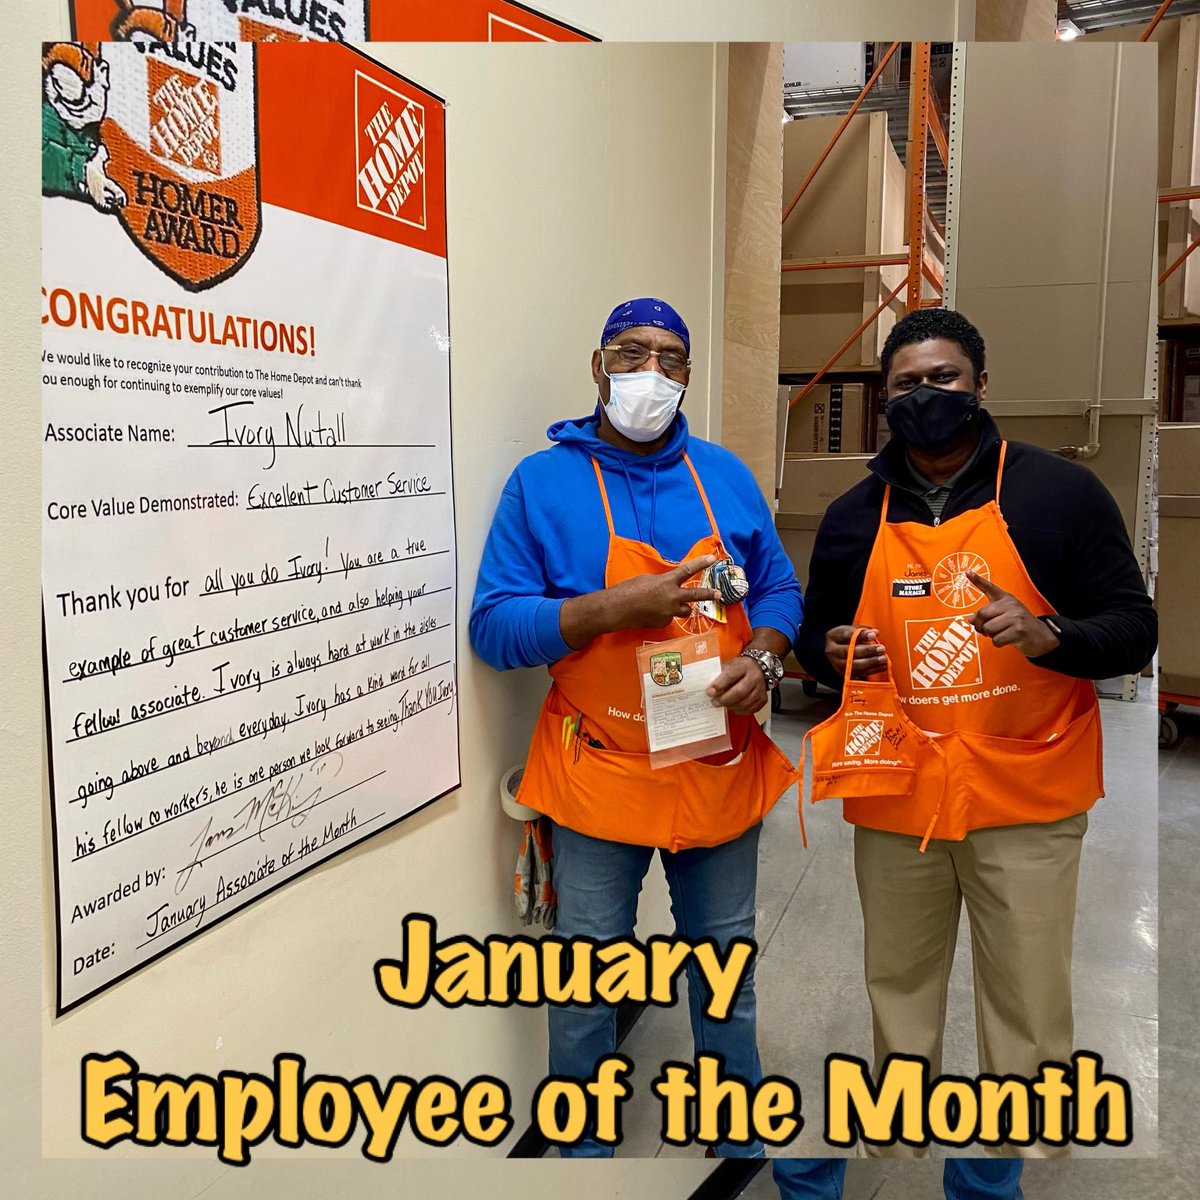 Congratulations to Ivory on being selected as Associate of the Month for January!!! Thank you for living our values every single day! @White2Dawn @Manny_CubFan